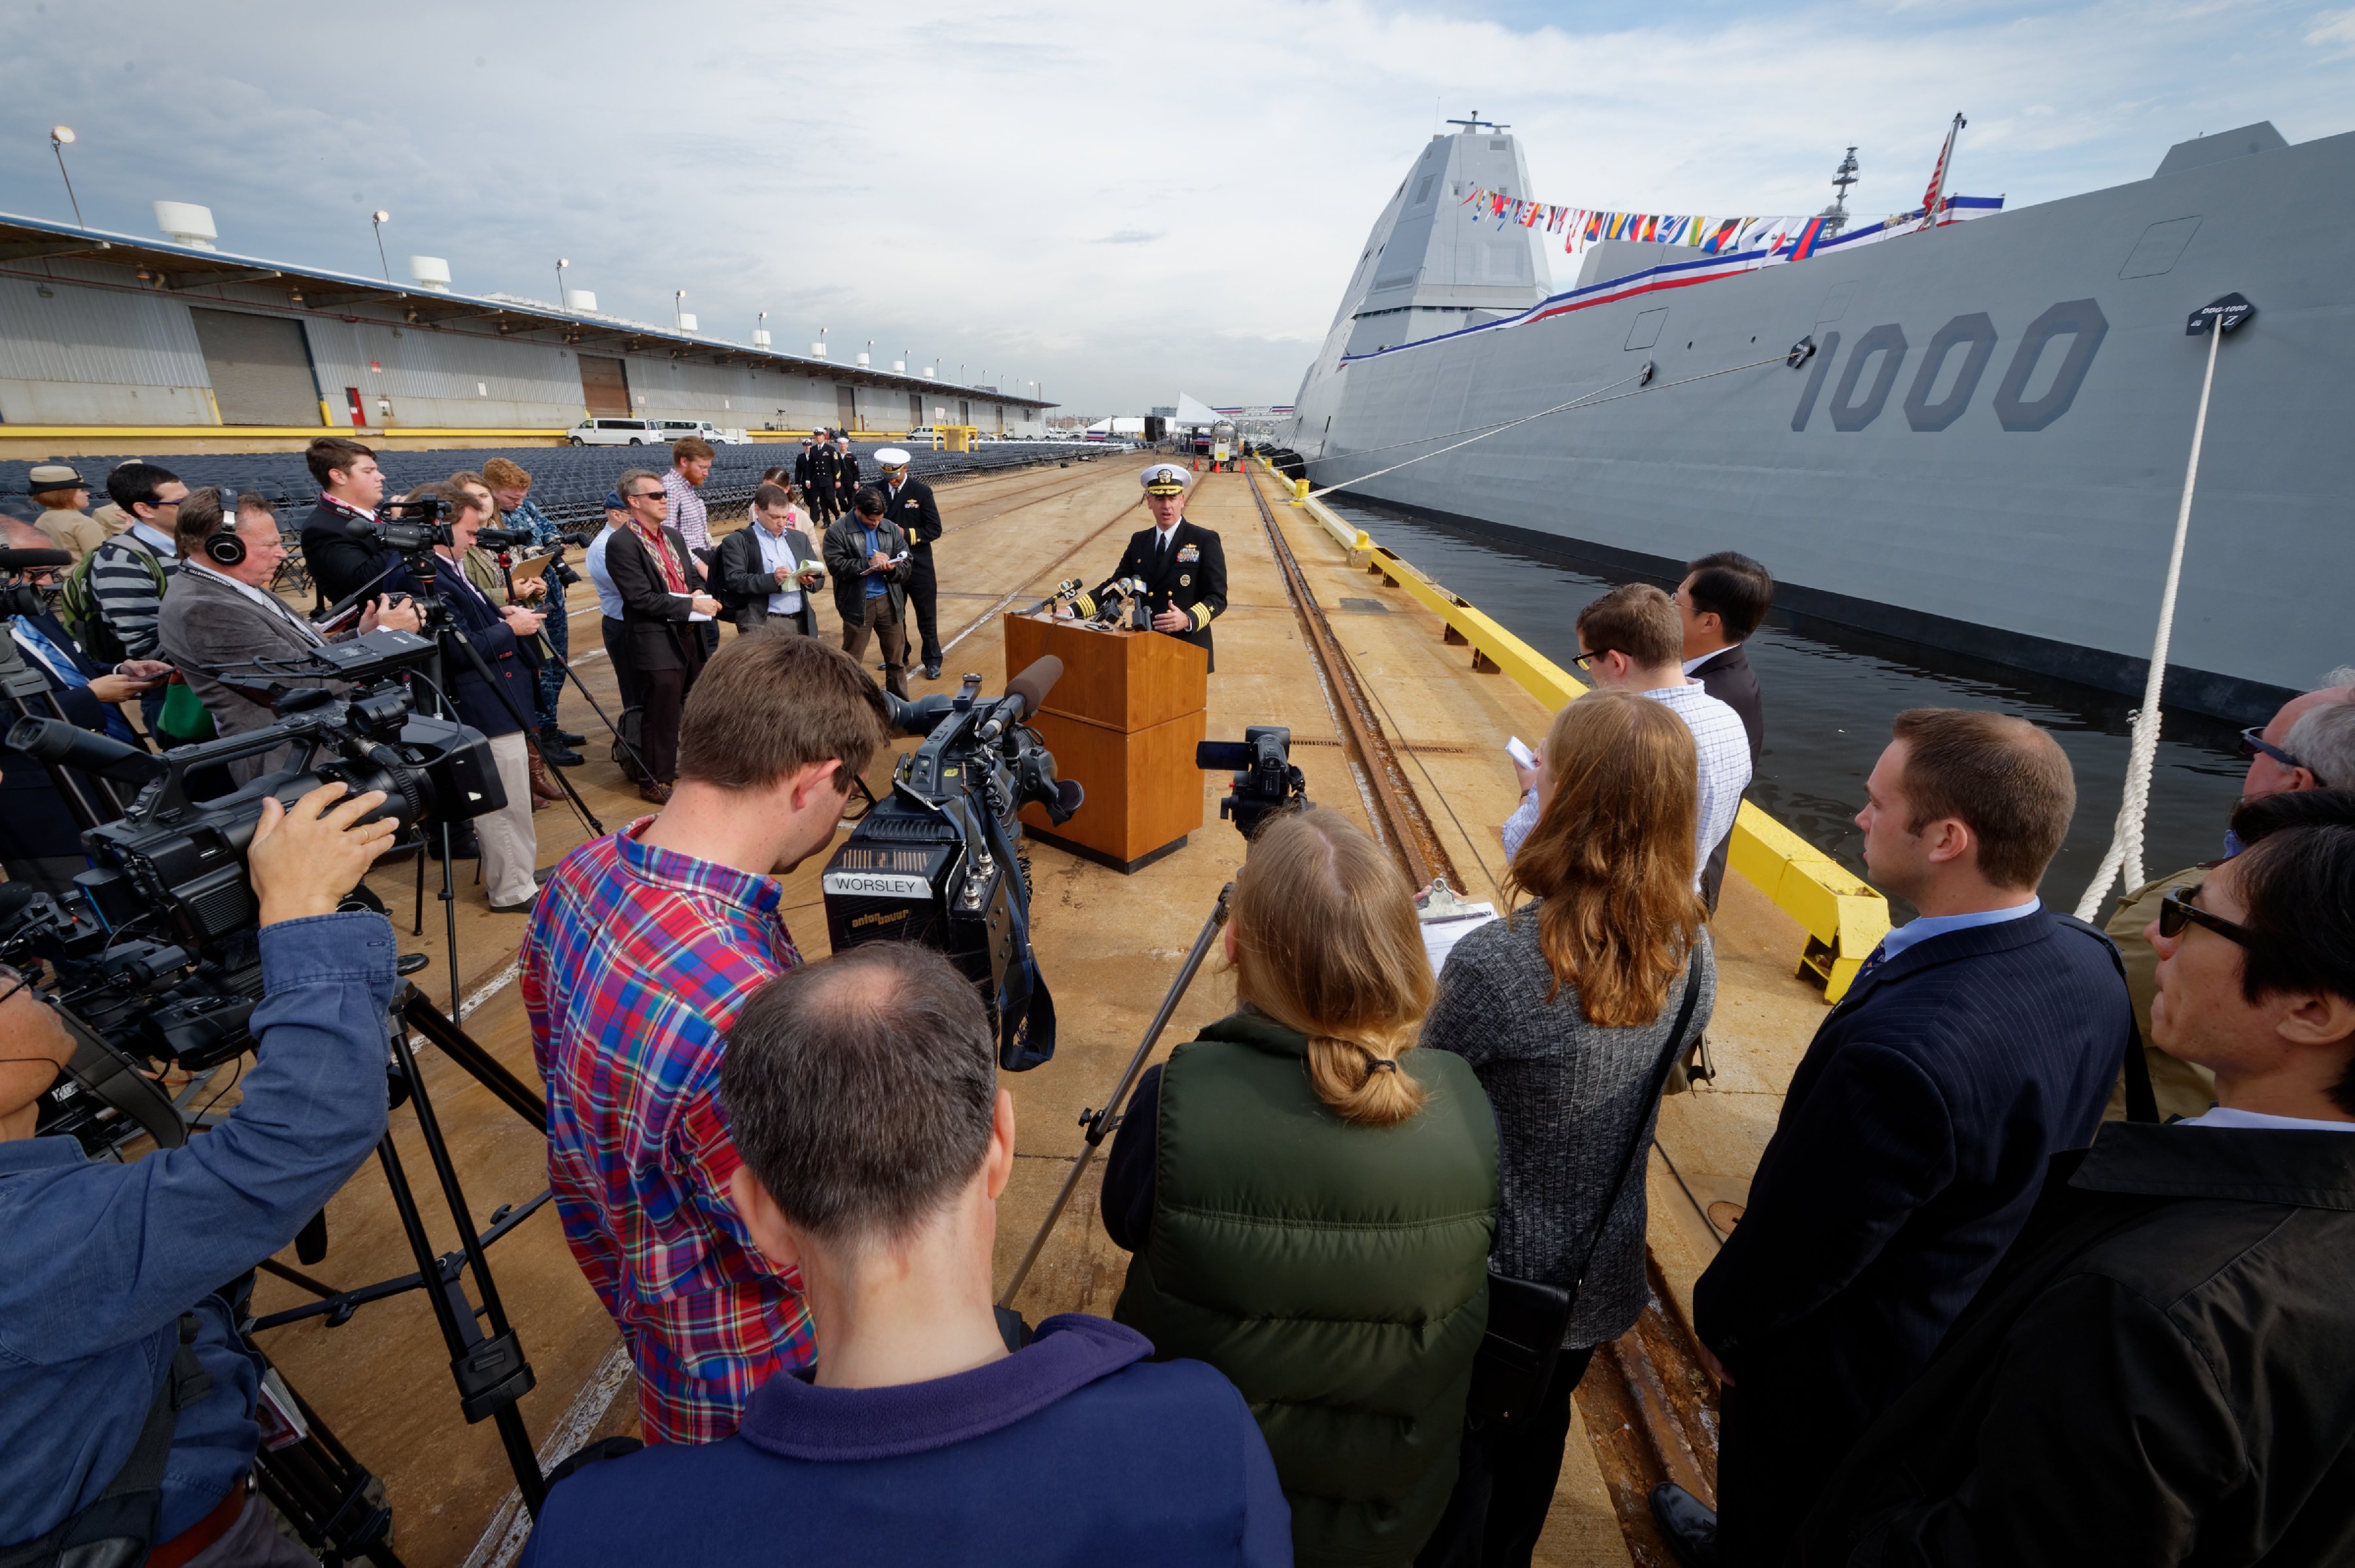 Capt. James A. Kirk, commanding officer of future USS Zumwalt (DDG 1000) answers questions from the media ahead of the ship's commissioning on Saturday. US Navy Photo